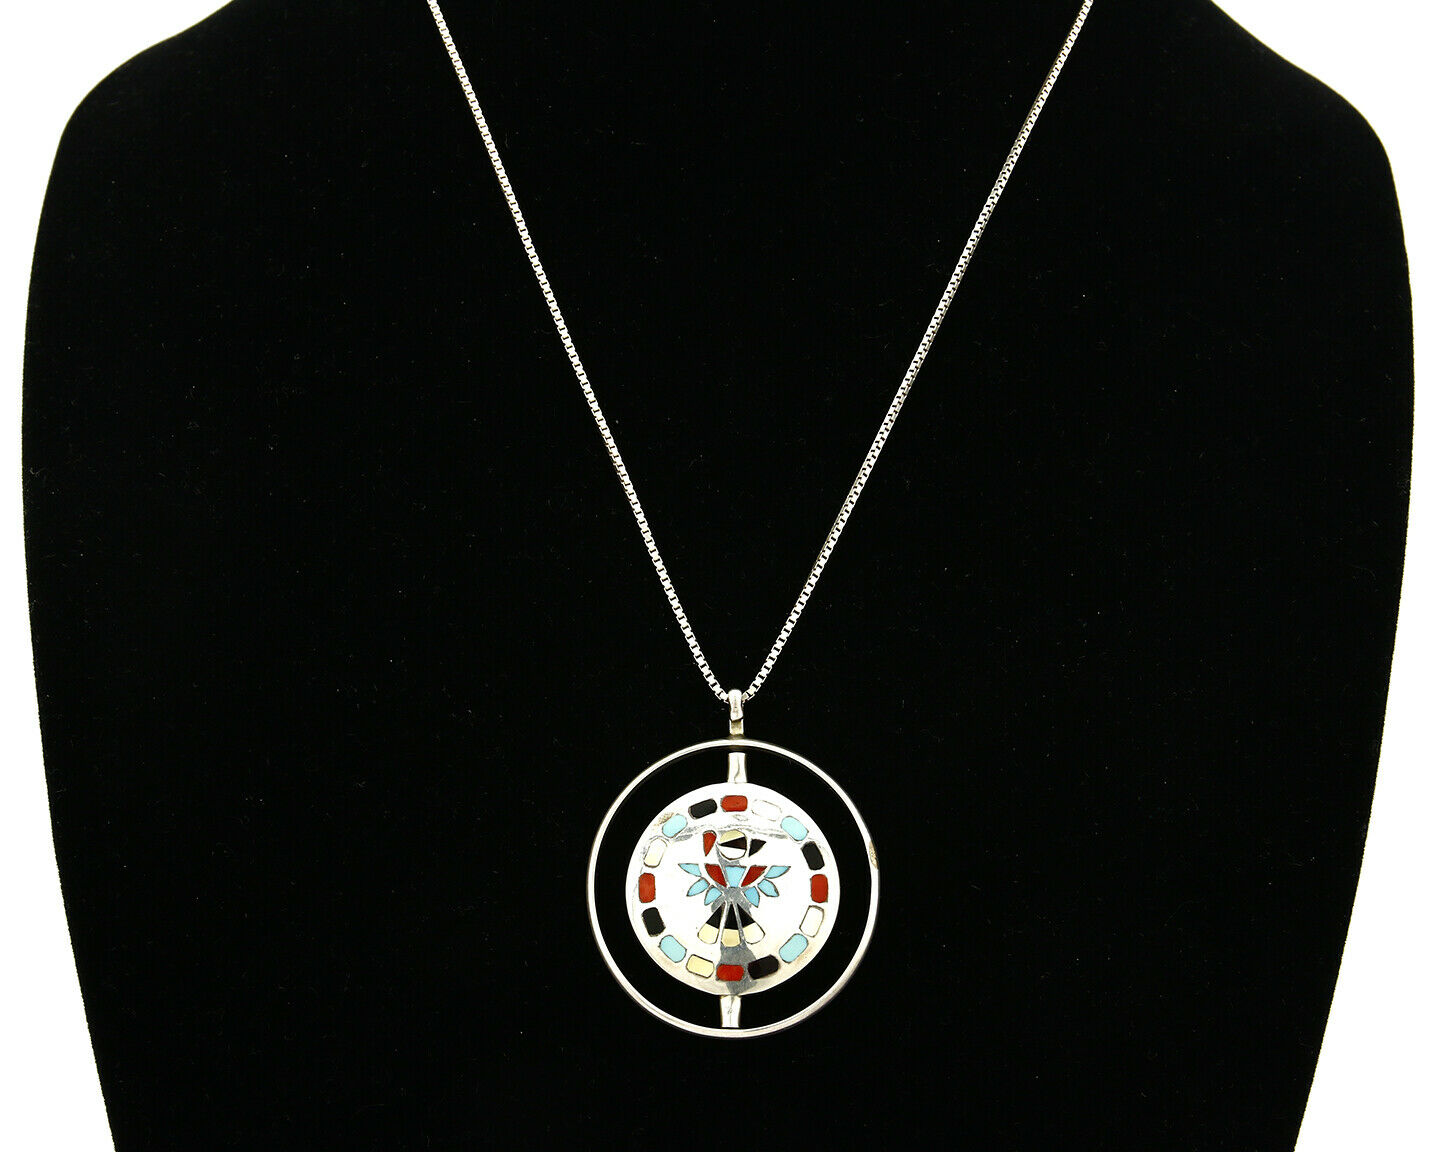 Women's Navajo Spinner Pendant .925 Silver & Inlaid Gemstone Necklace